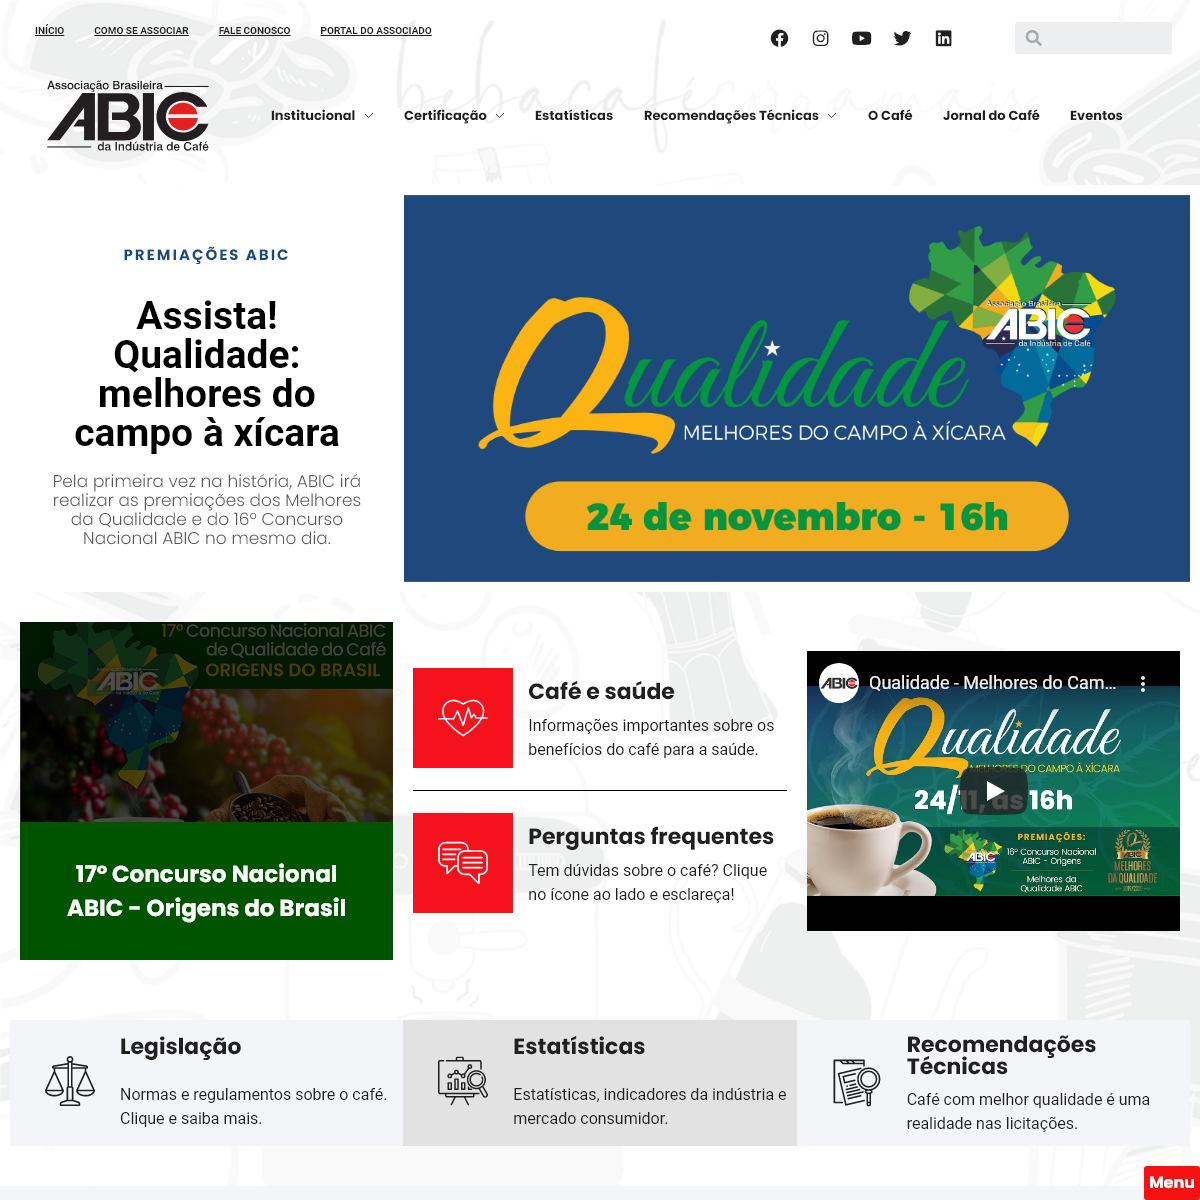 A complete backup of abic.com.br